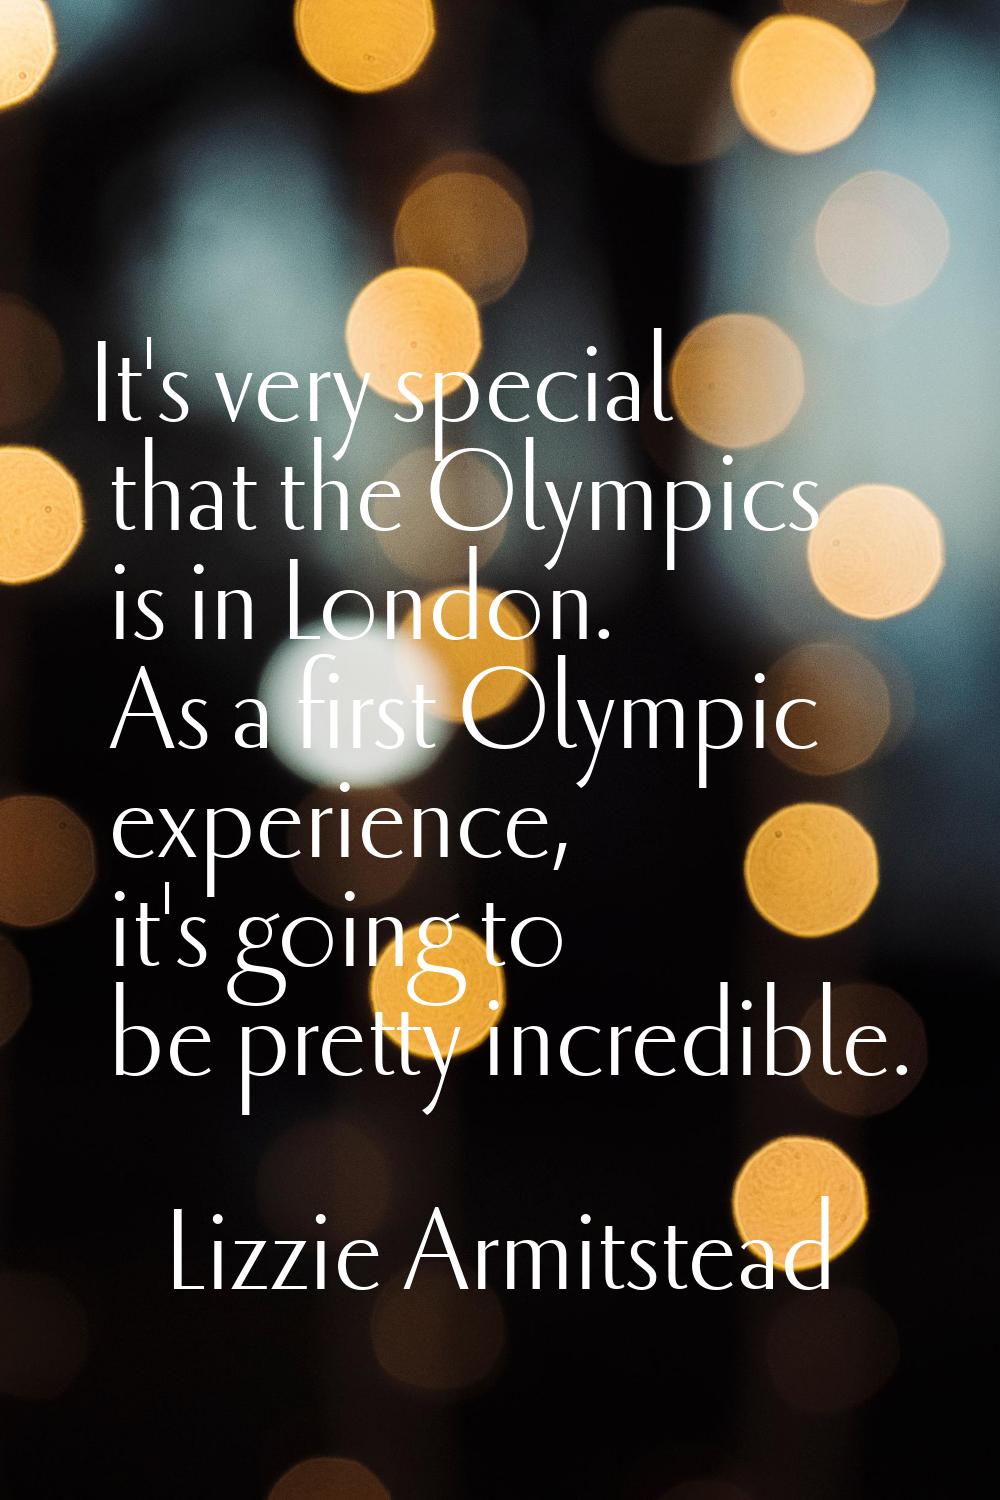 It's very special that the Olympics is in London. As a first Olympic experience, it's going to be p